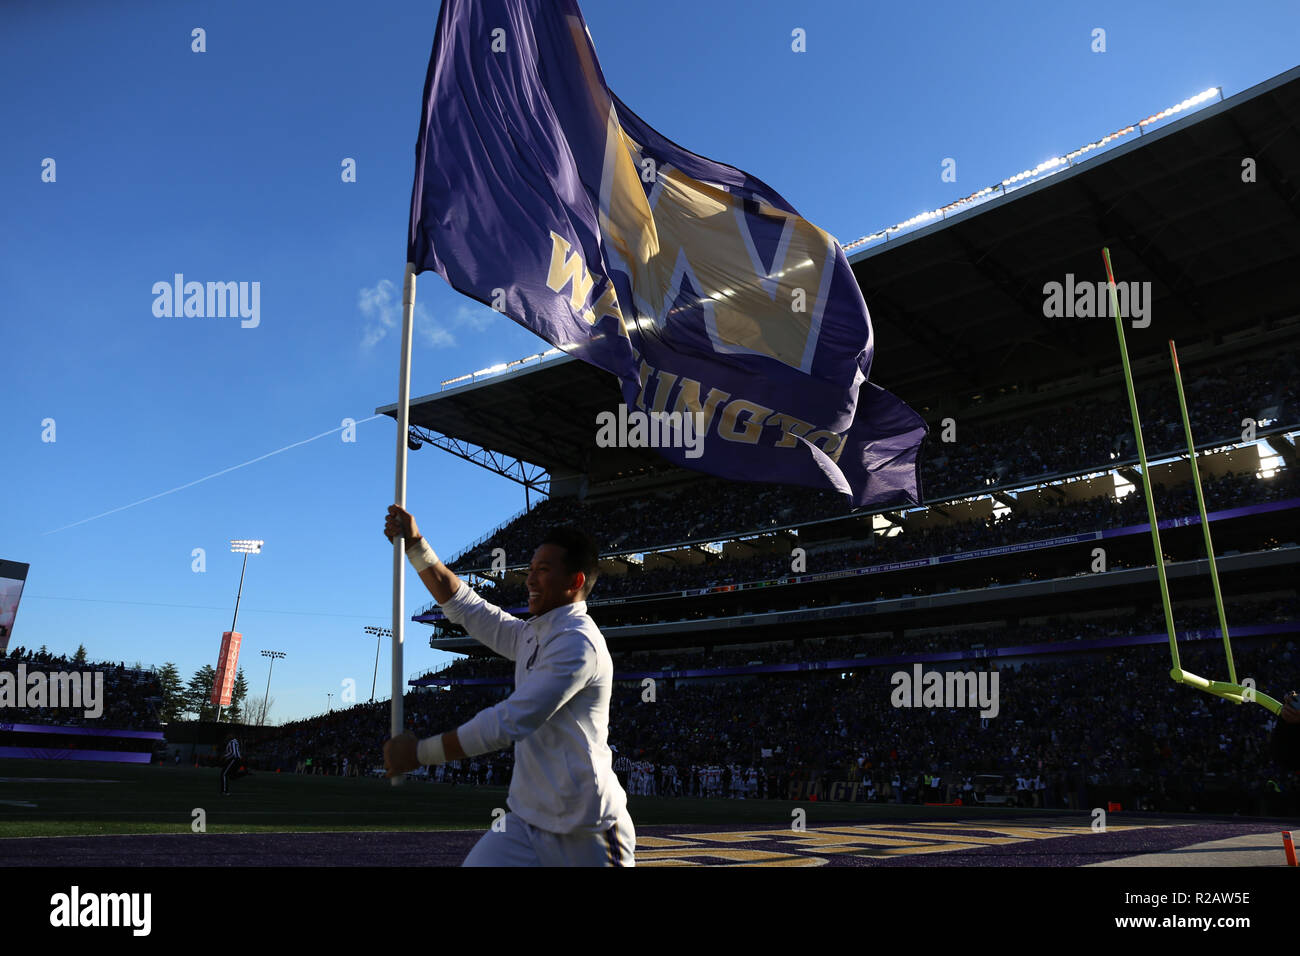 Seattle, WA, USA. 17th Nov, 2018. The Washington Huskies Spirit Squad runs the flag on the sideline during a game between the Oregon State Beavers and Washington Huskies at Husky Stadium in Seattle, WA. The Huskies defeated the Beavers 42-23. Sean Brown/CSM/Alamy Live News Stock Photo